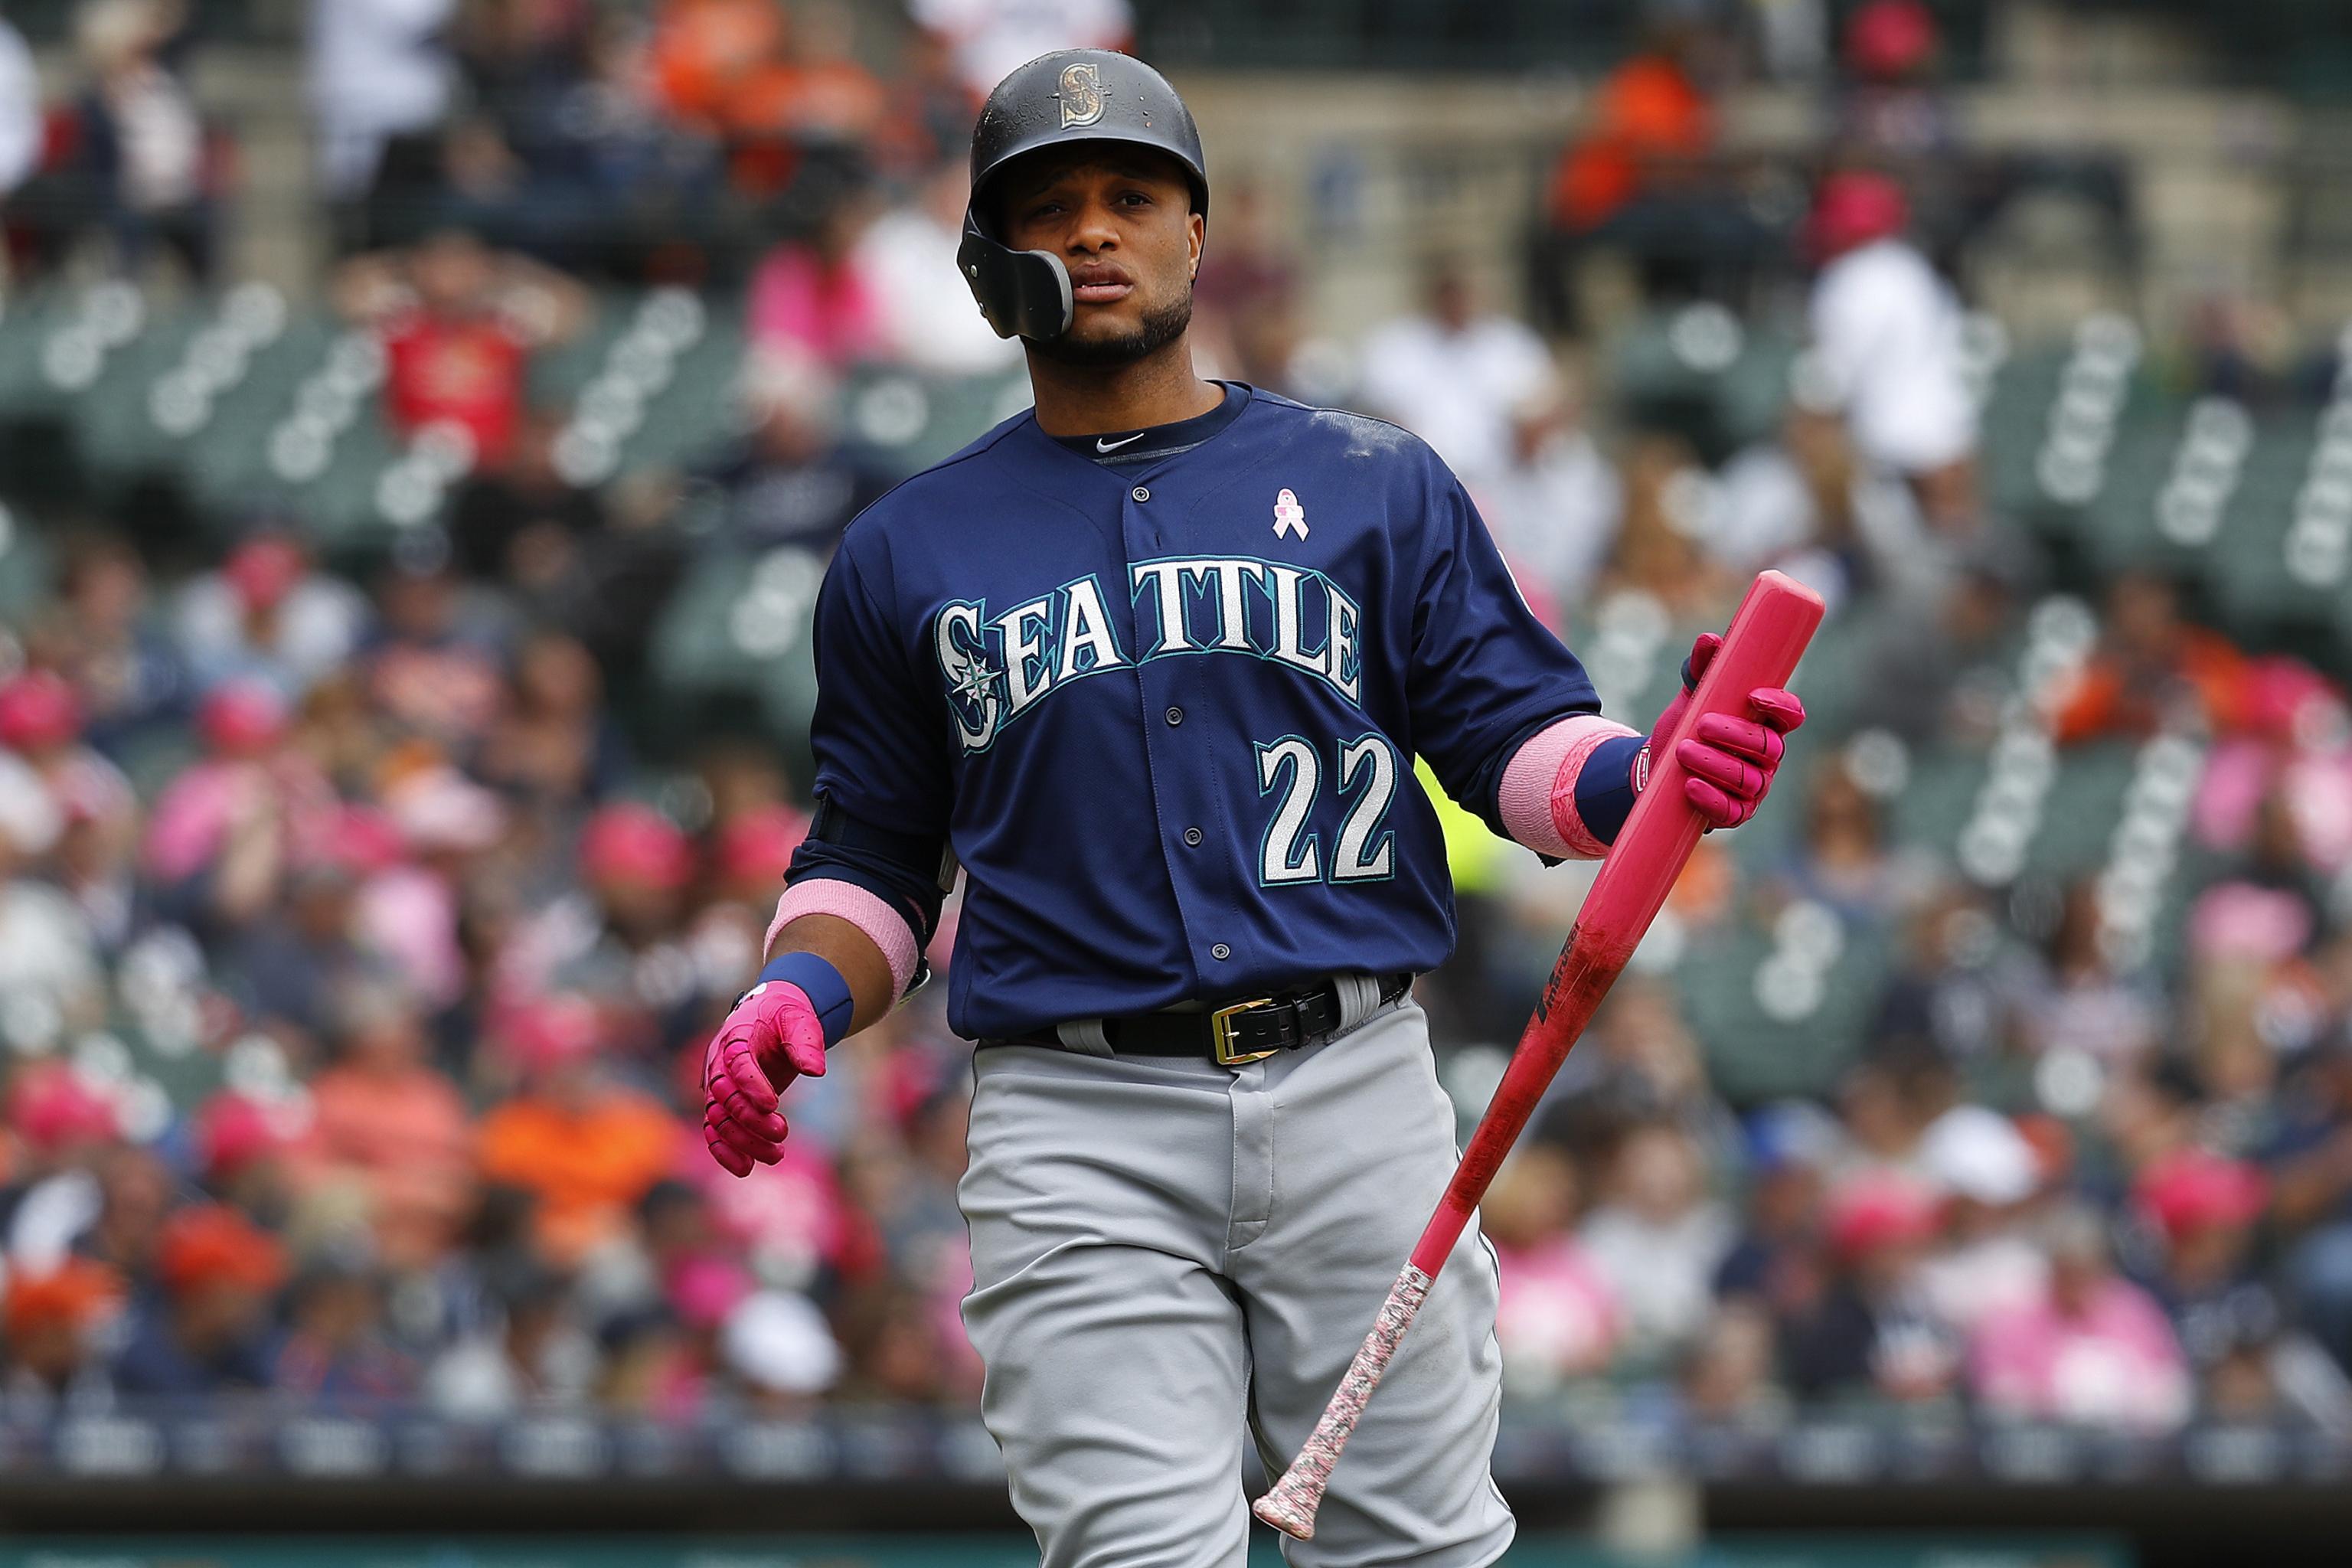 Robinson Cano Suspended 80 Games for Positive Drug Test - The New York Times